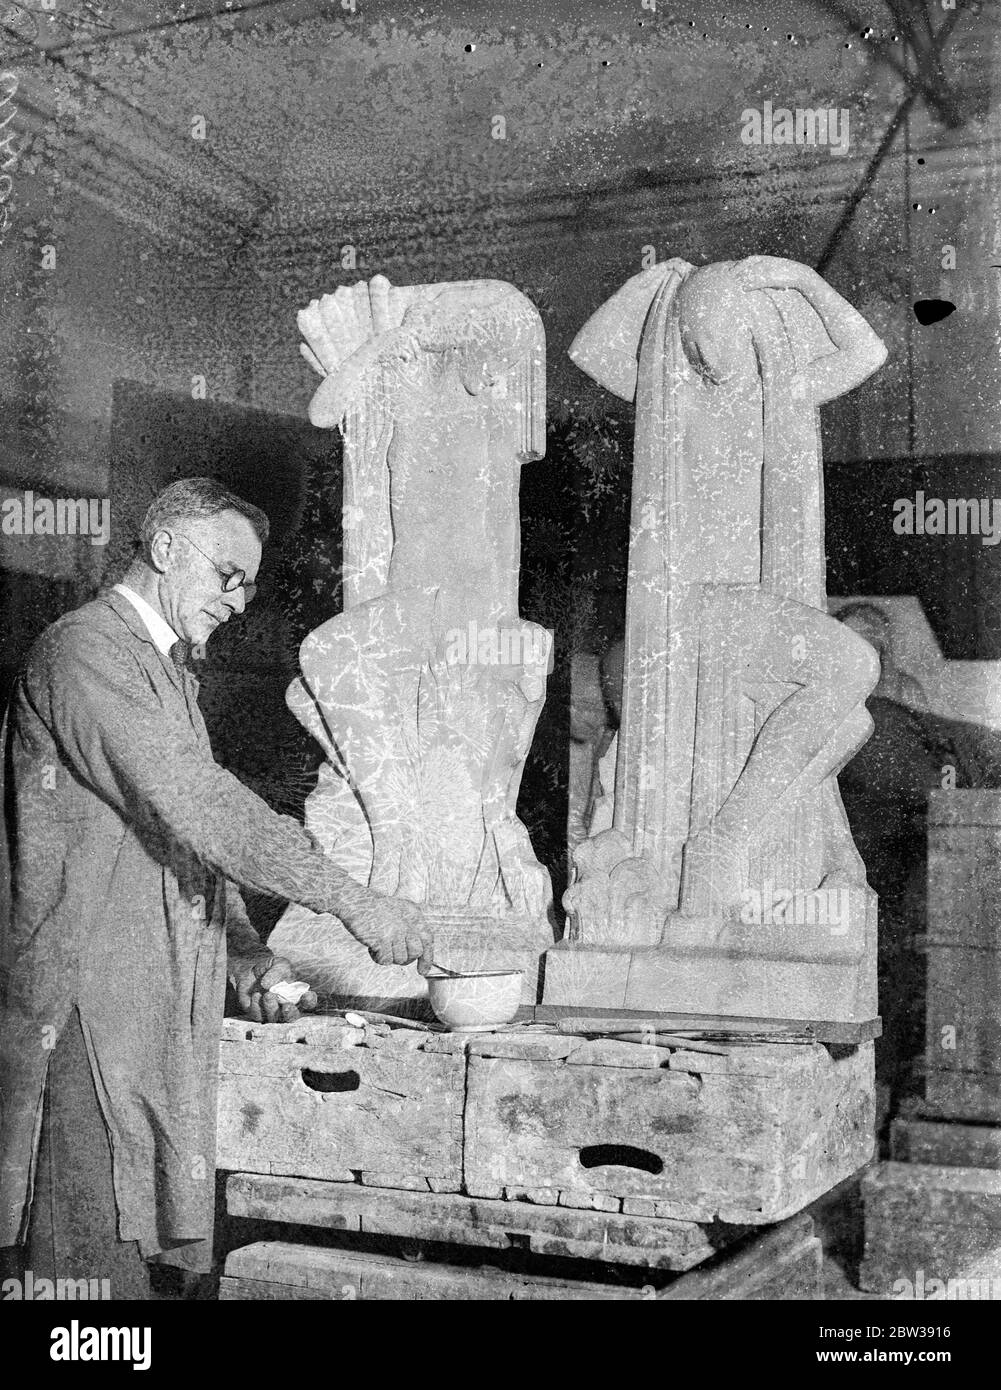 London sculptor ' s striking subject panels . Mr T J Clapperton , A R B S , the London sculptor , at work in his studio on two subject panels ' Pool ' and ' Waterfall ' . 11 January 1934 30s, 30's, 1930s, 1930's, thirties, nineteen thirties Stock Photo